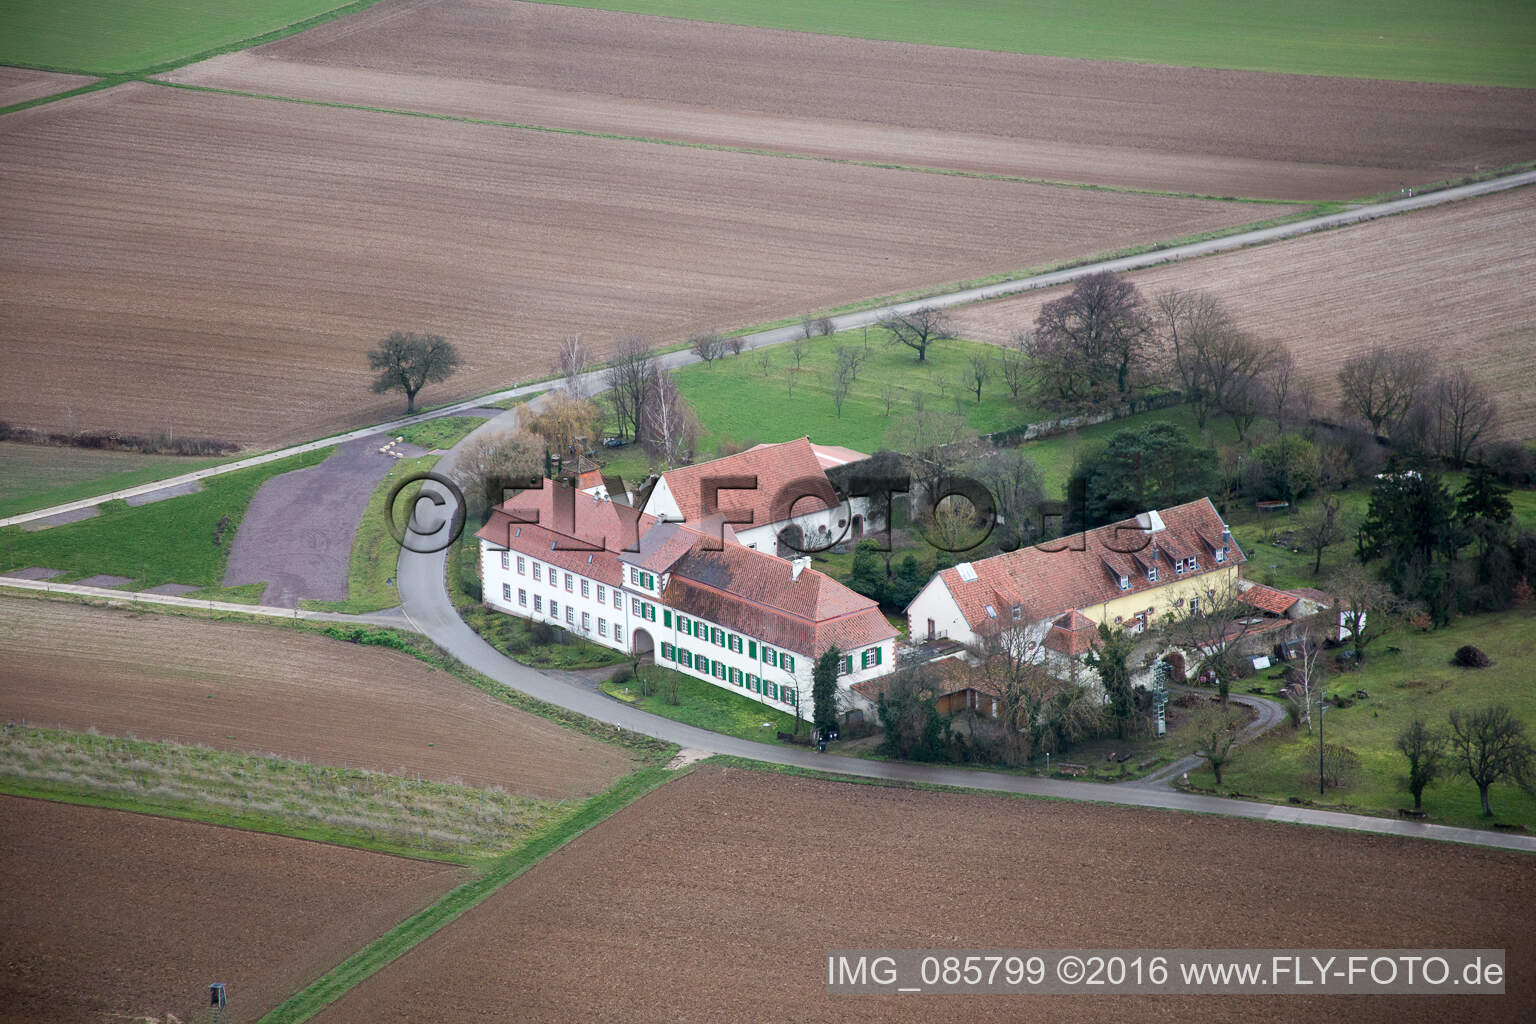 Drone image of Workshop for Assisted Living of hidden Talents GmbH in the district Haftelhof in Schweighofen in the state Rhineland-Palatinate, Germany